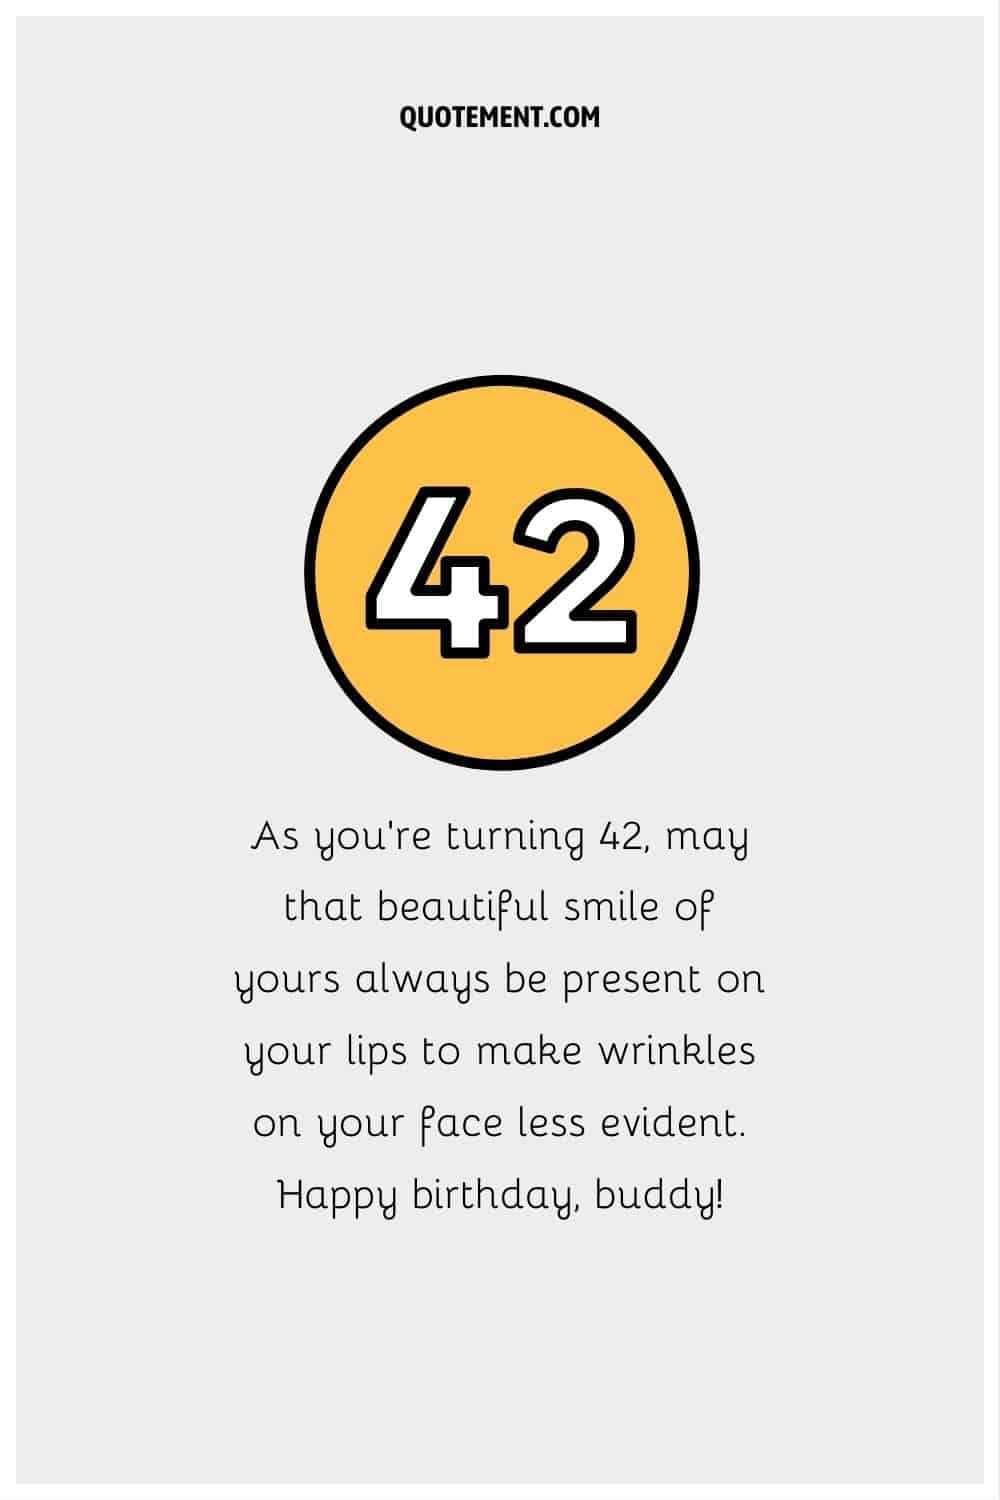 “As you’re turning 42, may that beautiful smile of yours always be present on your lips to make wrinkles on your face less evident. Happy birthday, buddy!”